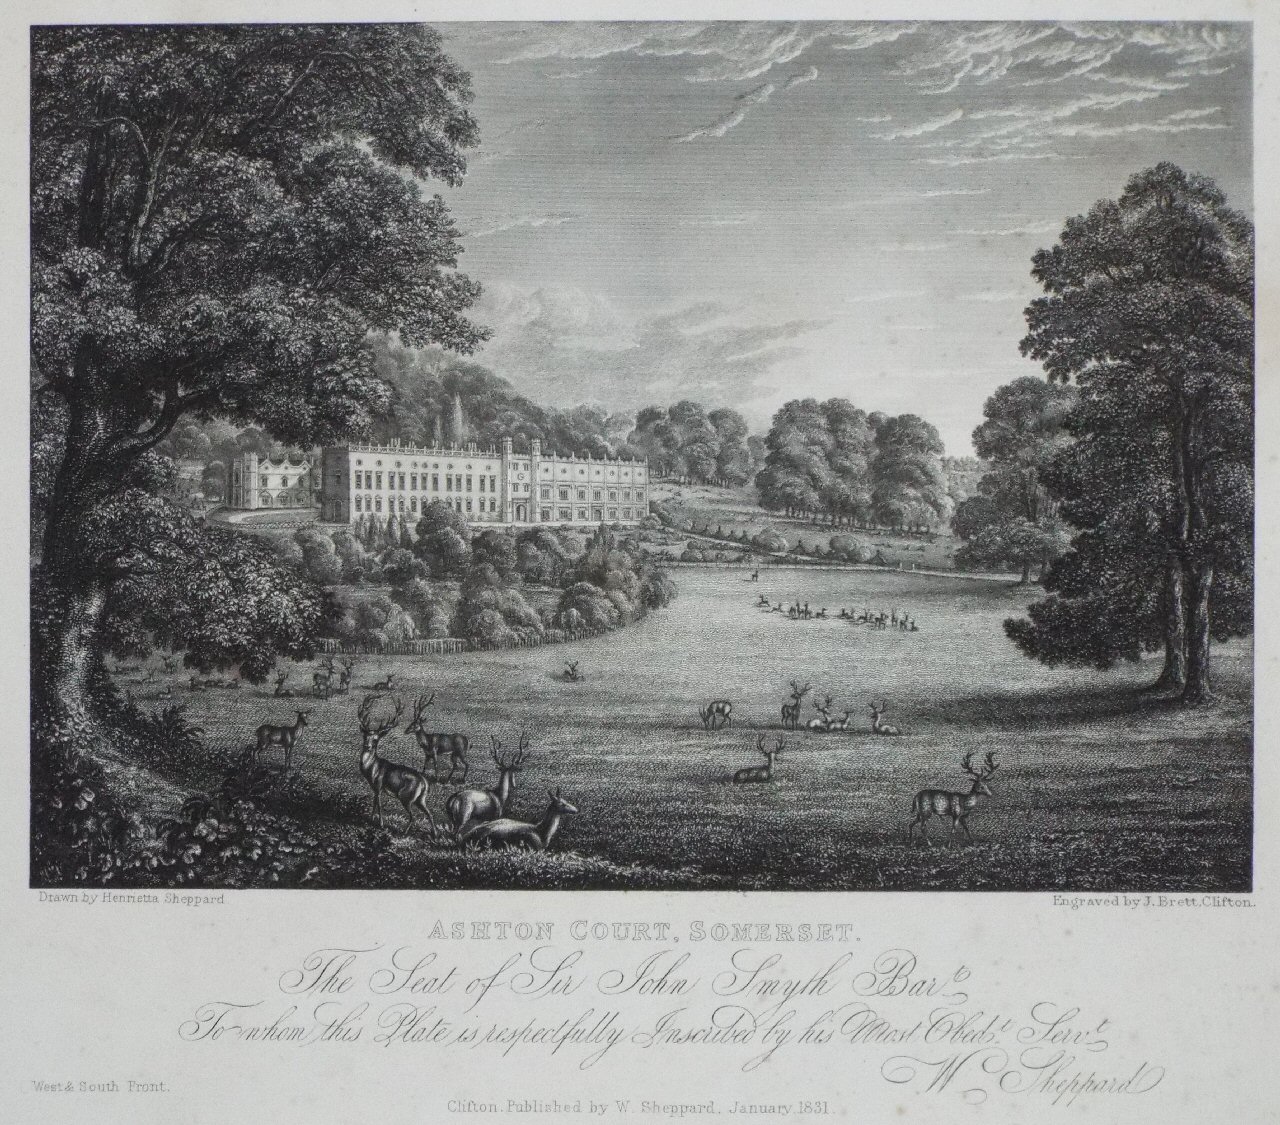 Print - Ashton Court, Somerset. The Seat of Sir John Smyth Bart. To Whom this Plate is Respectfully Inscribed by his Most Obt. Servt. W. Sheppard. - Brett